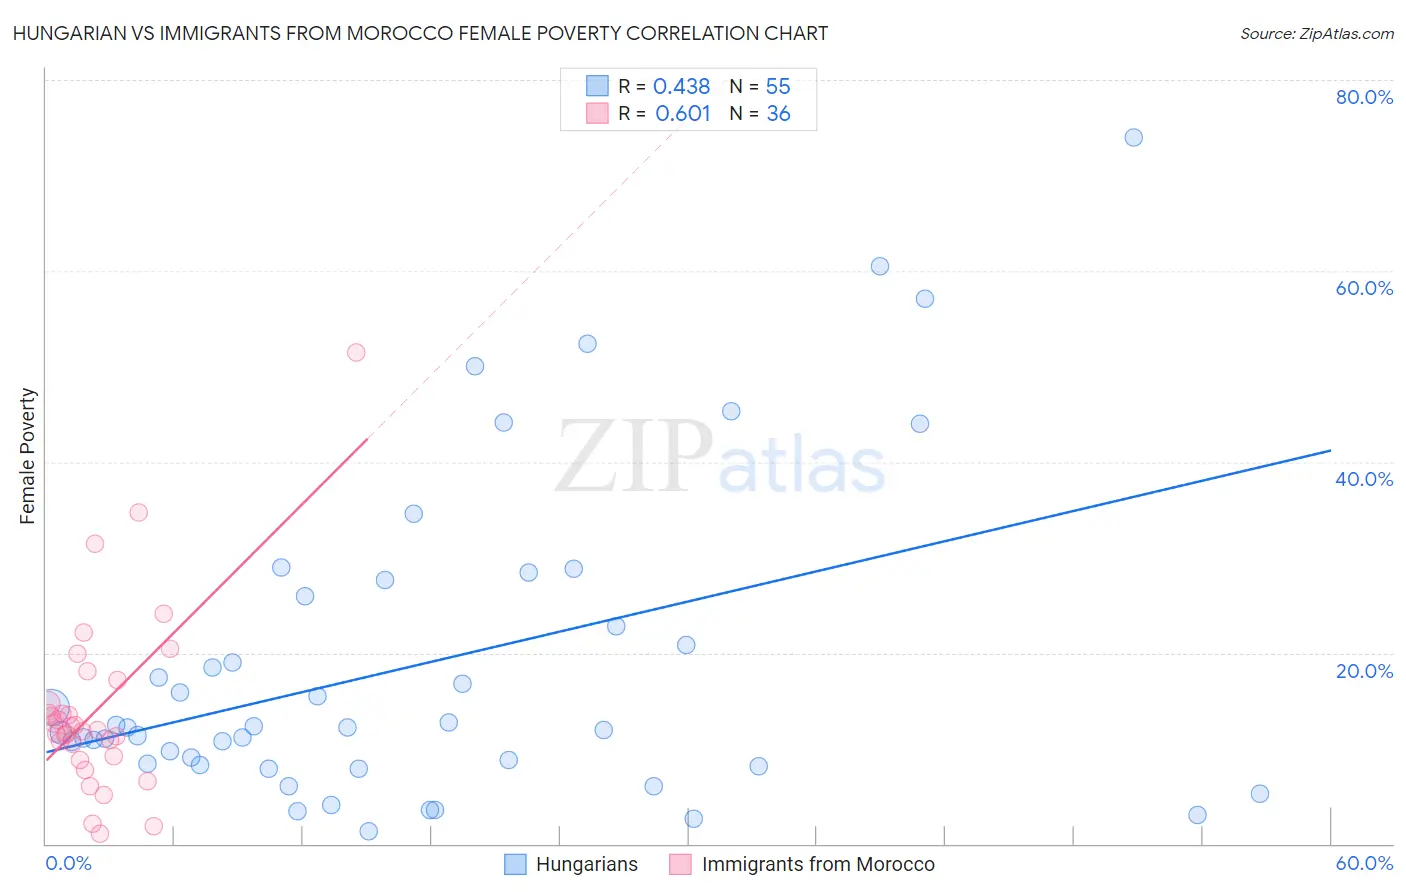 Hungarian vs Immigrants from Morocco Female Poverty